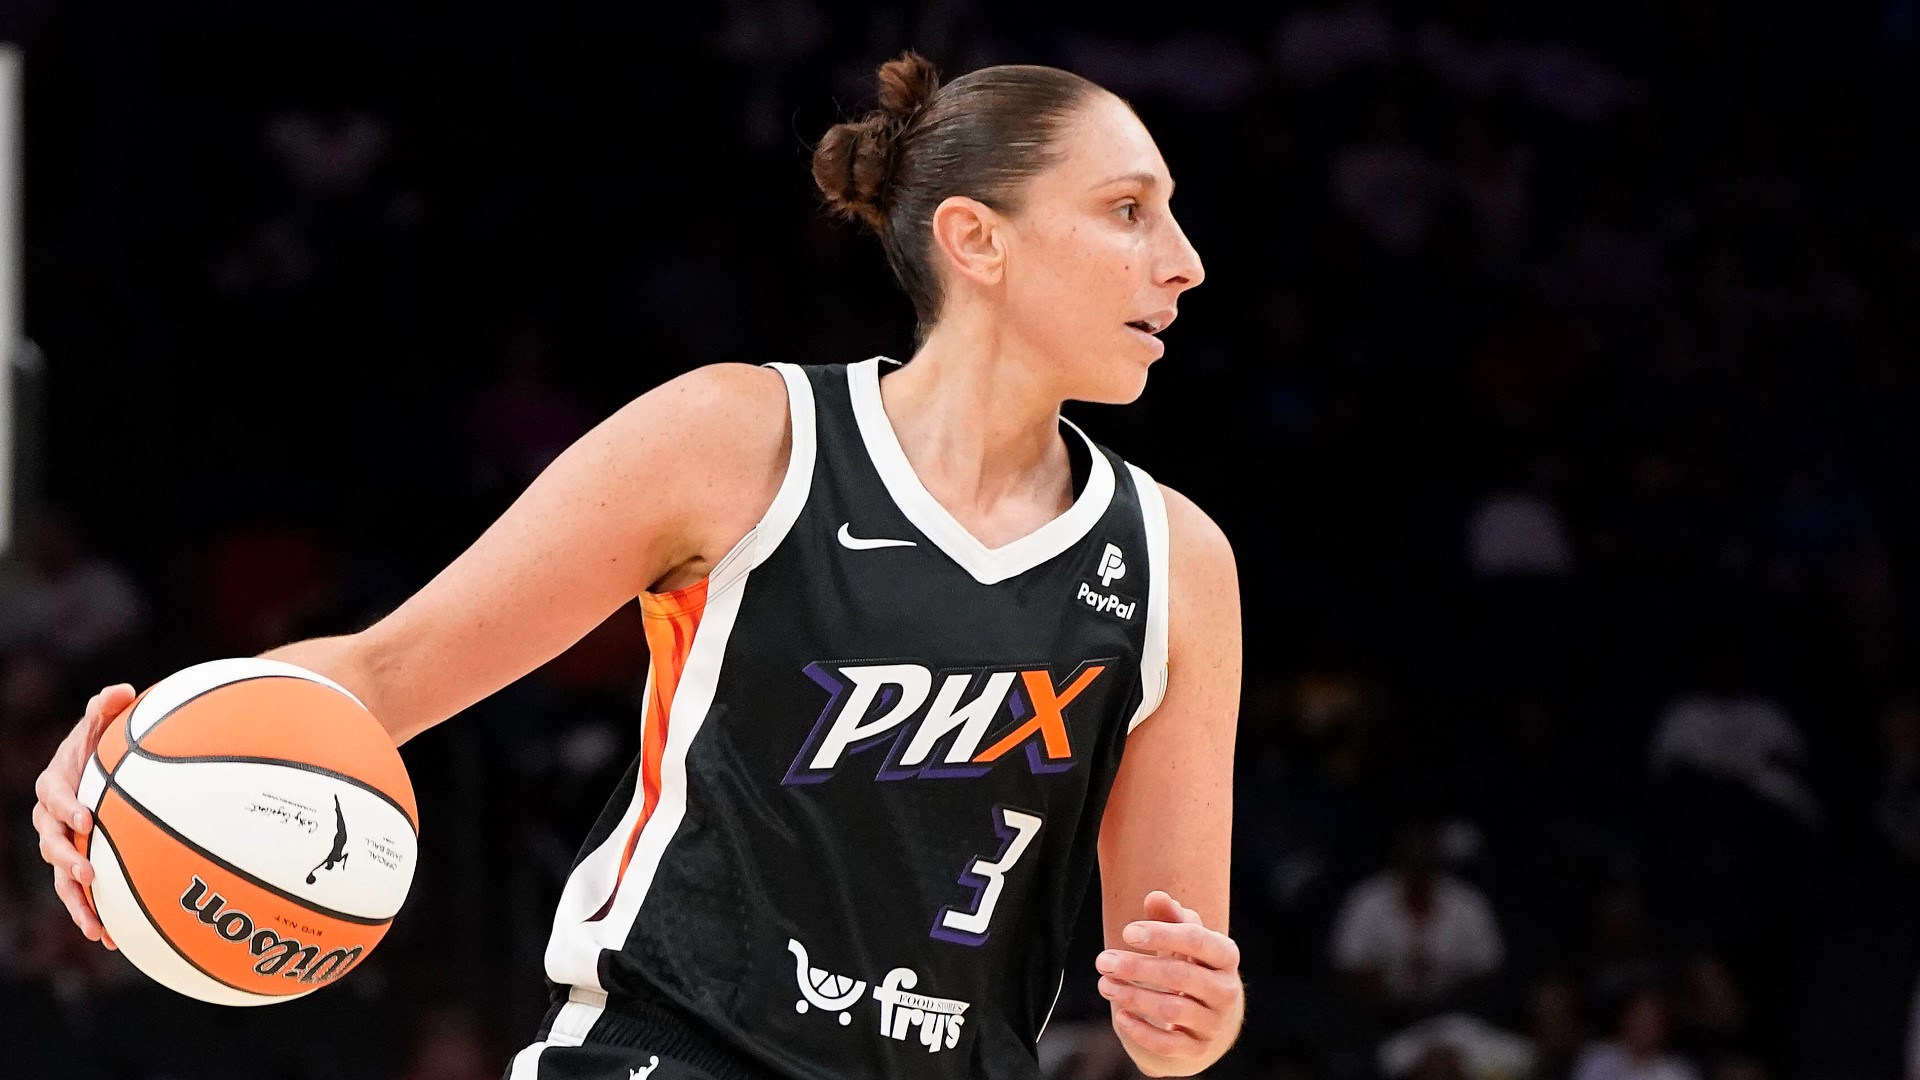 The Mercury will face the L.A. Sparks for the third time in as many weeks on Friday night.